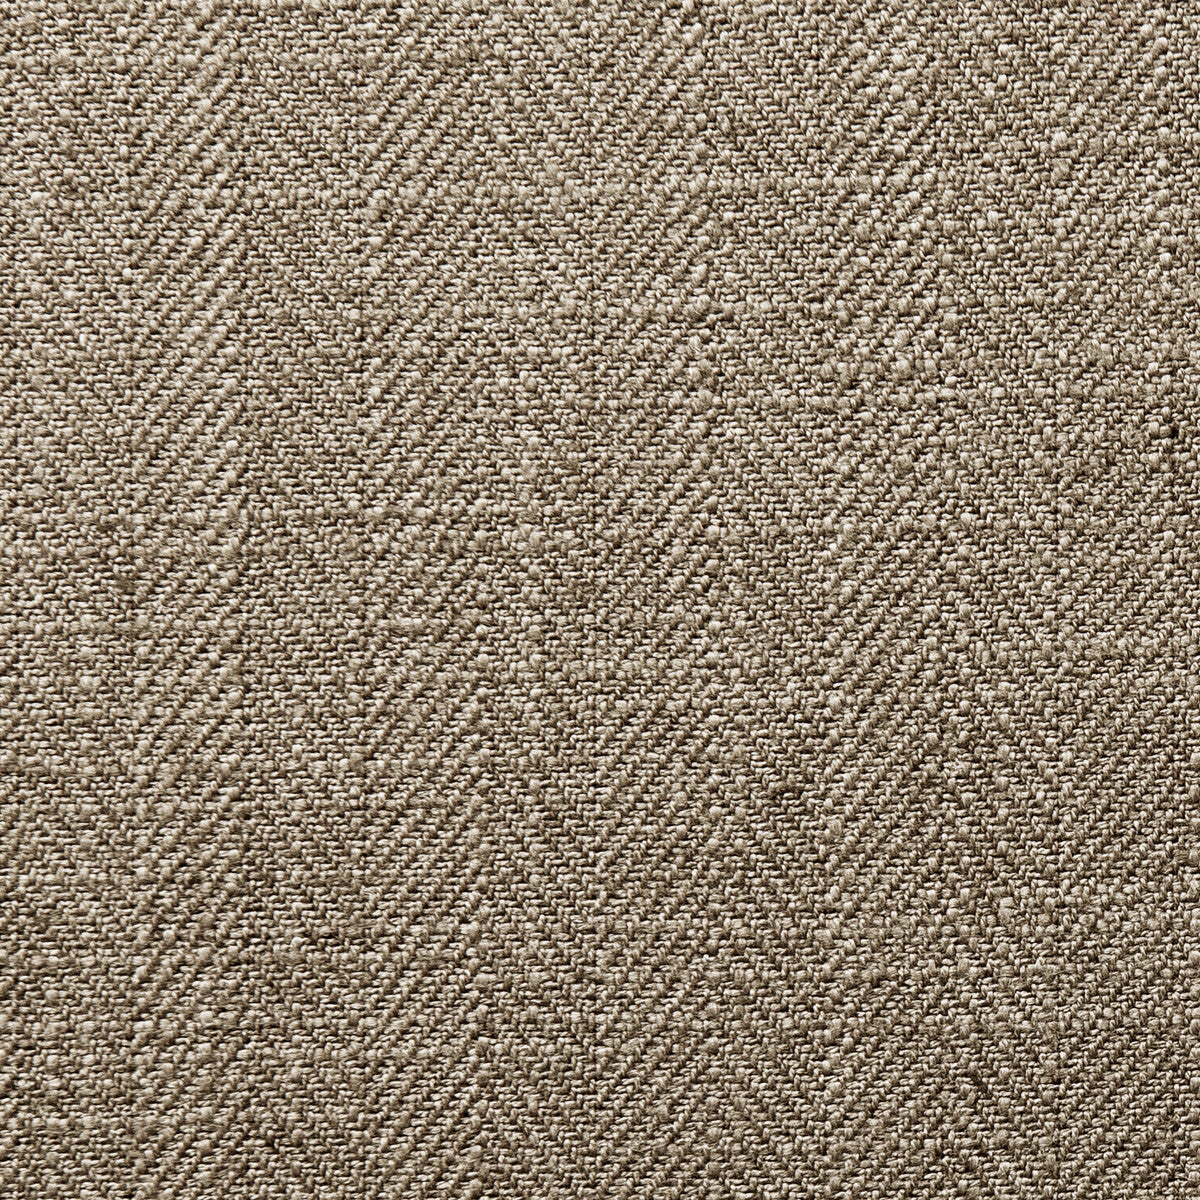 Henley fabric in mocha color - pattern F0648/22.CAC.0 - by Clarke And Clarke in the Clarke &amp; Clarke Henley collection